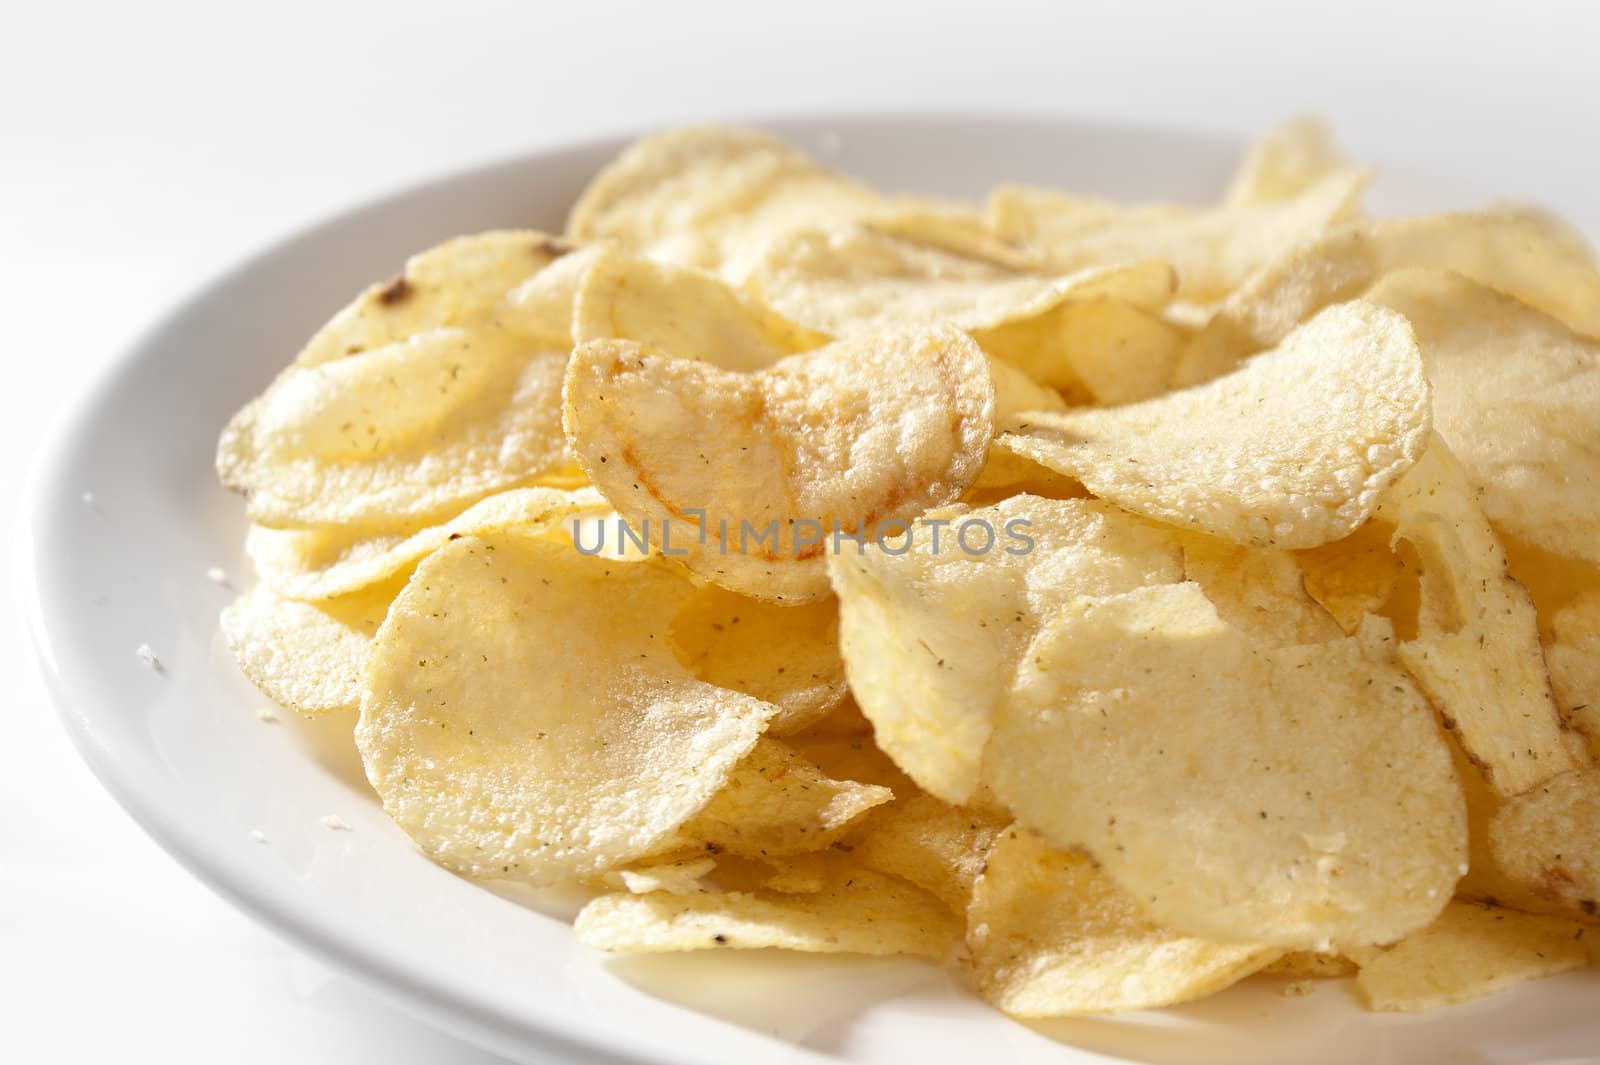 Some potato chips on the white plate